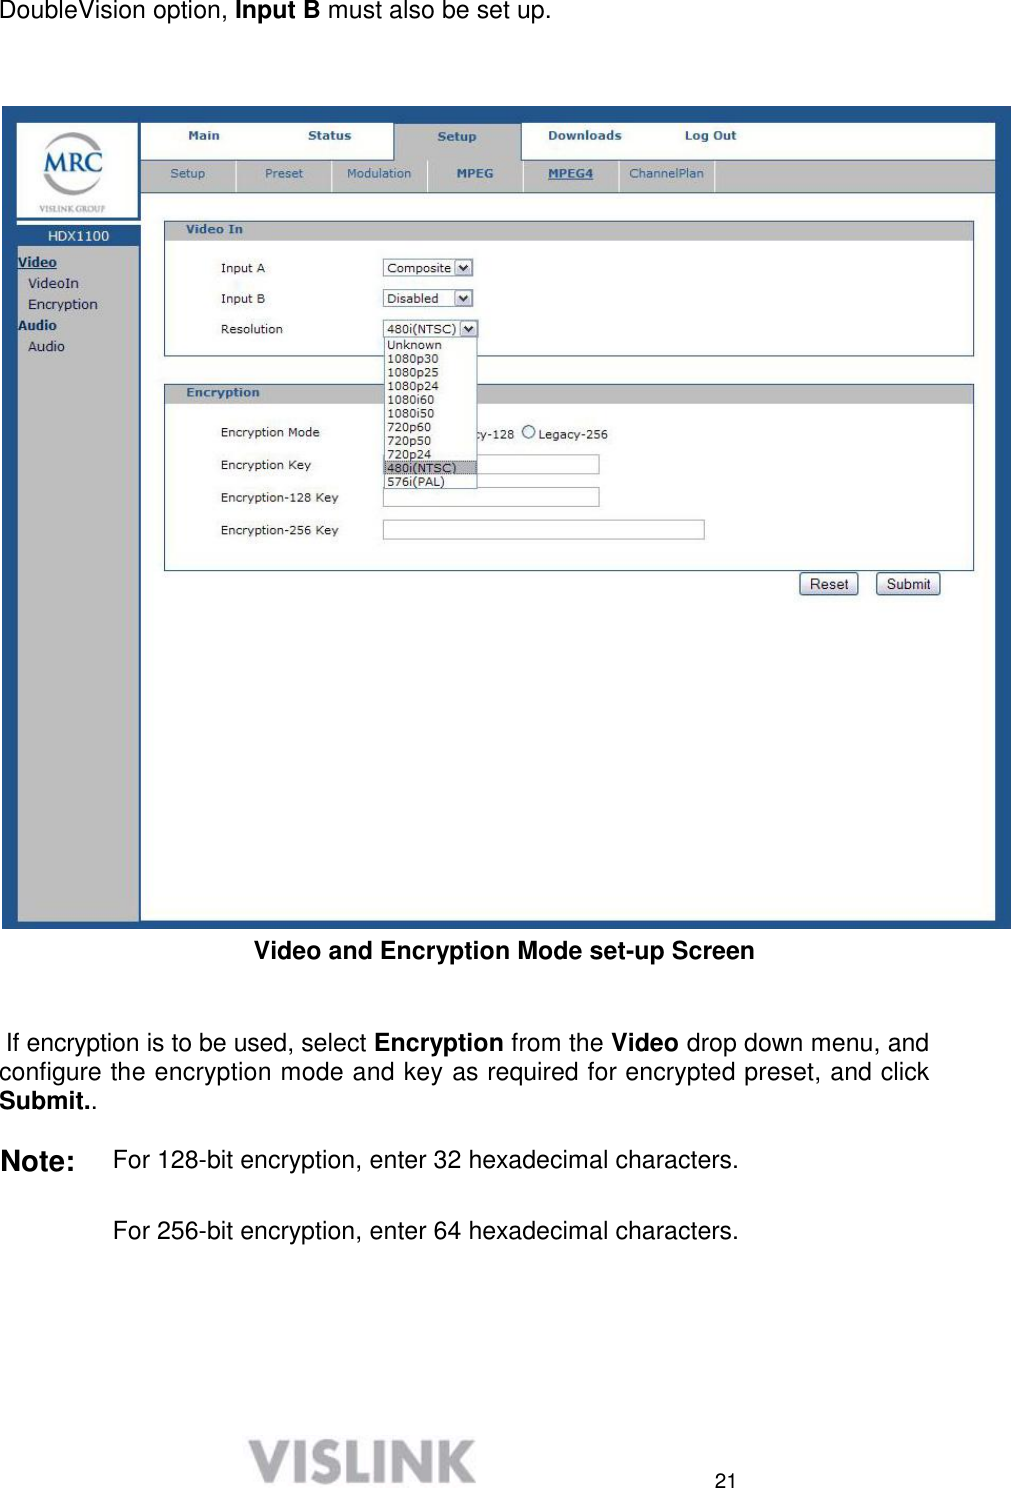  21 DoubleVision option, Input B must also be set up.     Video and Encryption Mode set-up Screen     If encryption is to be used, select Encryption from the Video drop down menu, and configure the encryption mode and key as required for encrypted preset, and click Submit..  Note:  For 128-bit encryption, enter 32 hexadecimal characters.  For 256-bit encryption, enter 64 hexadecimal characters.      